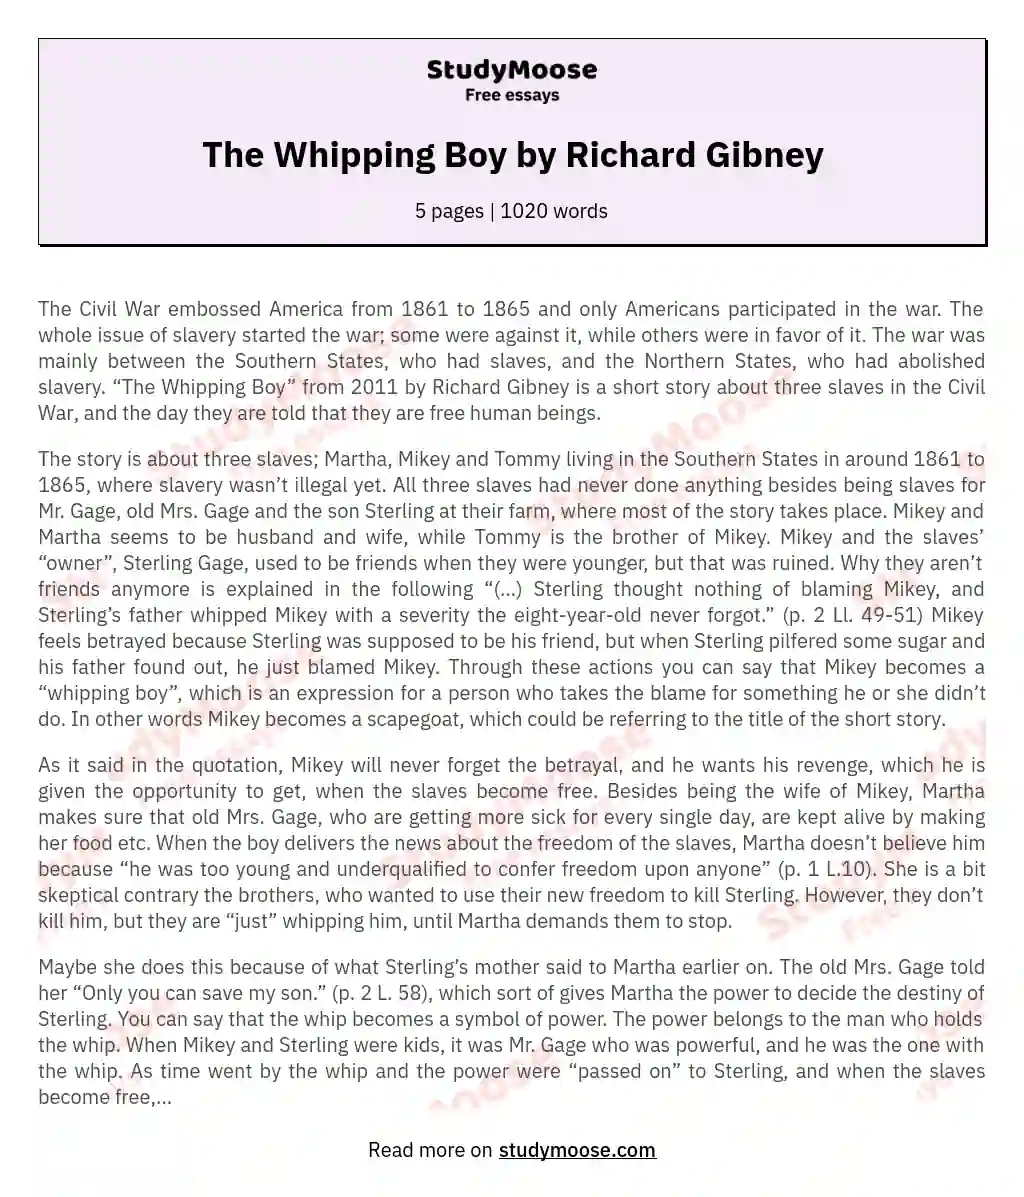 The Whipping Boy by Richard Gibney